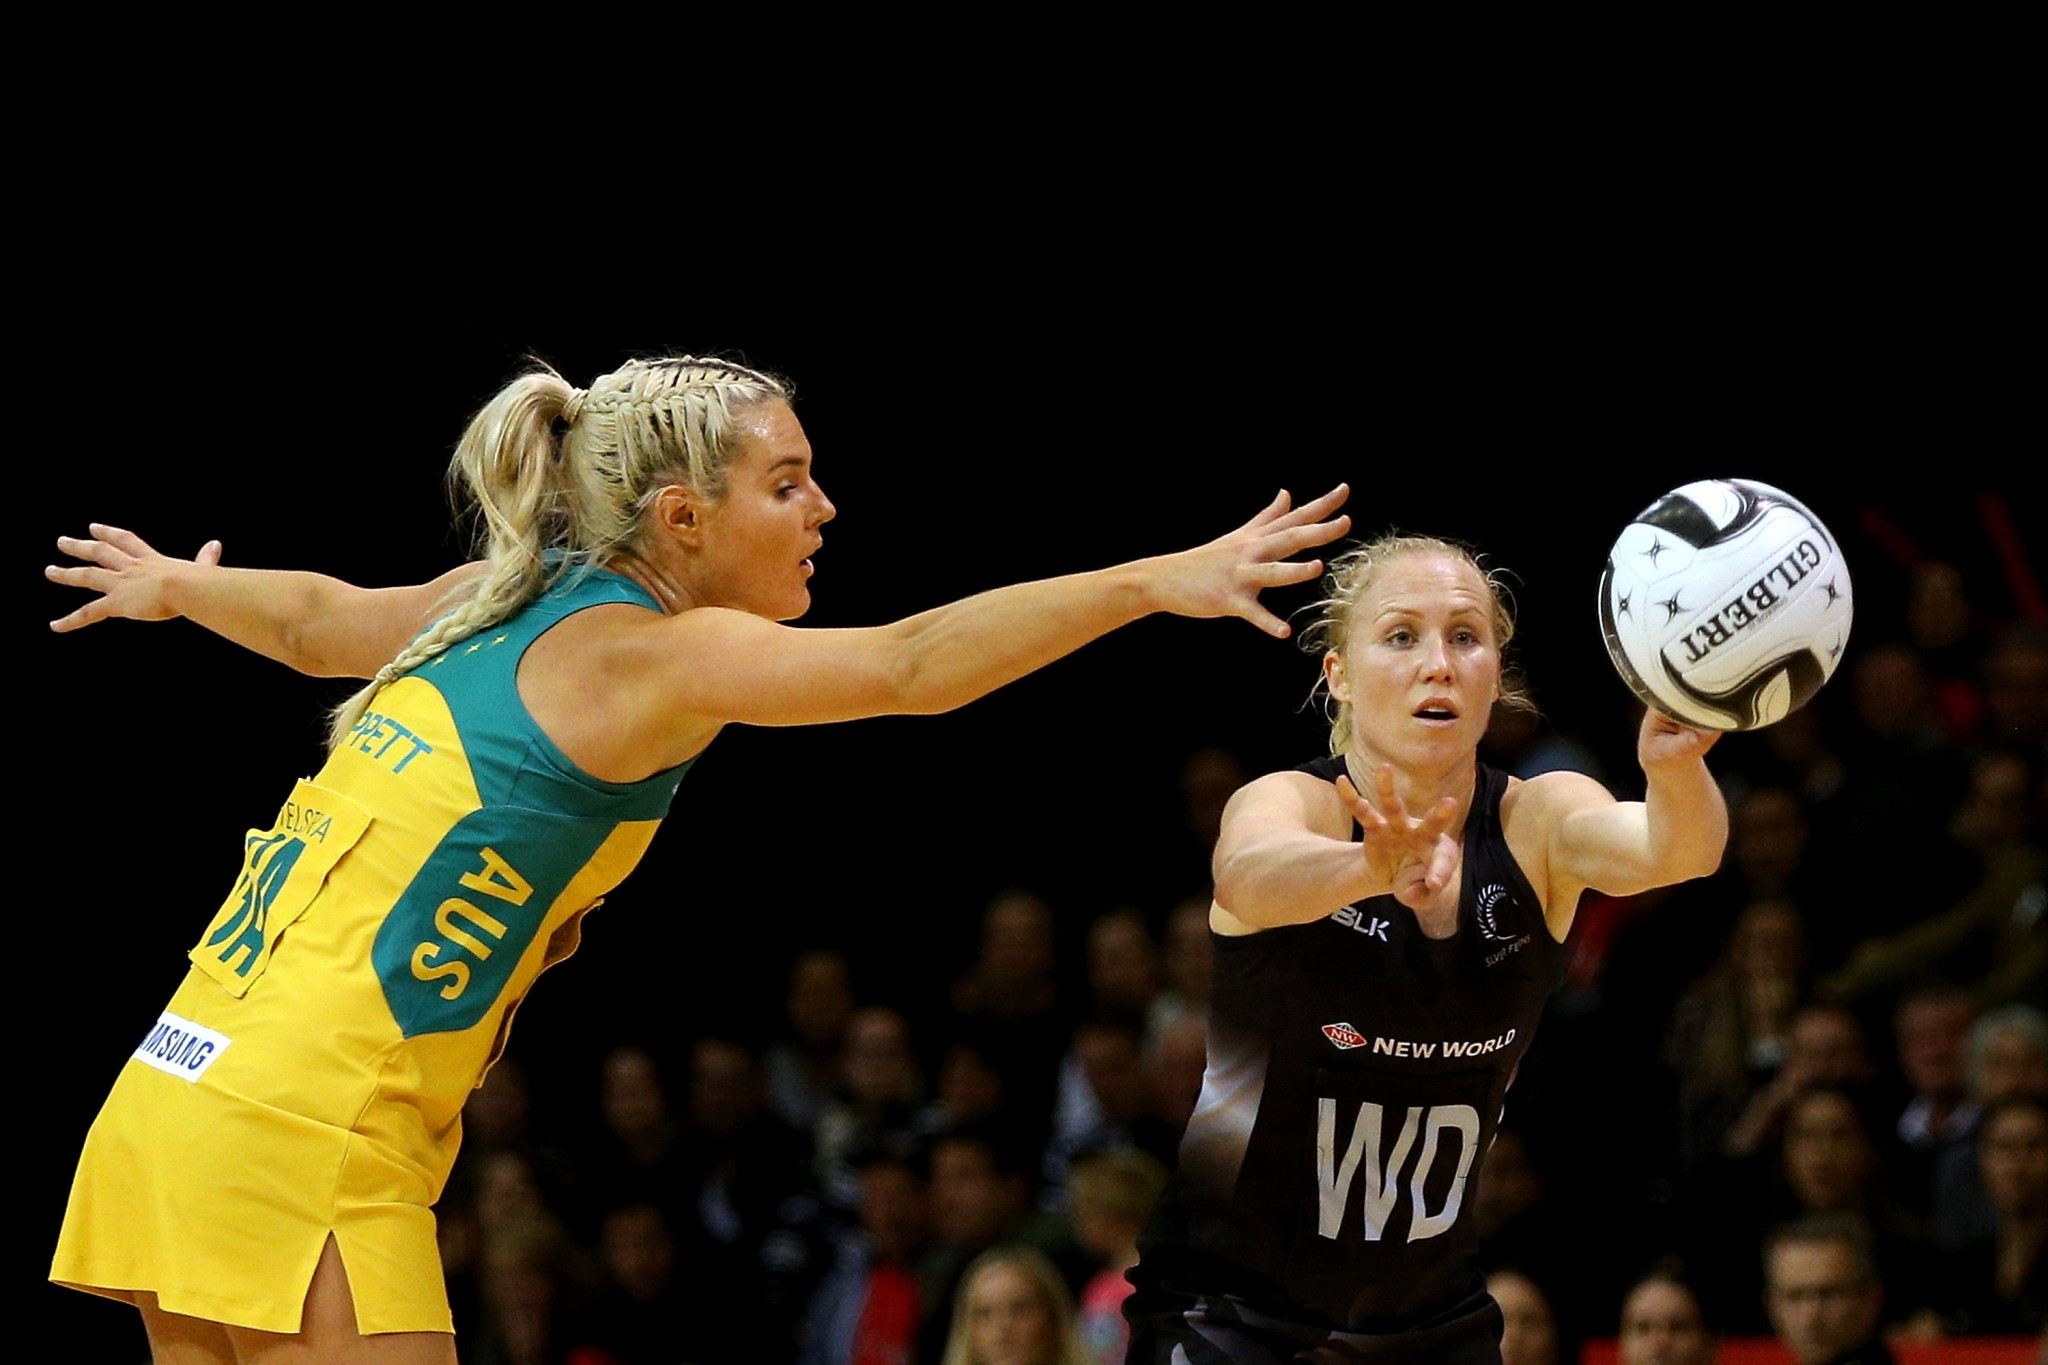 Double Commonwealth Games gold medallist makes herself unavailable for New Zealand netball team at Gold Coast 2018